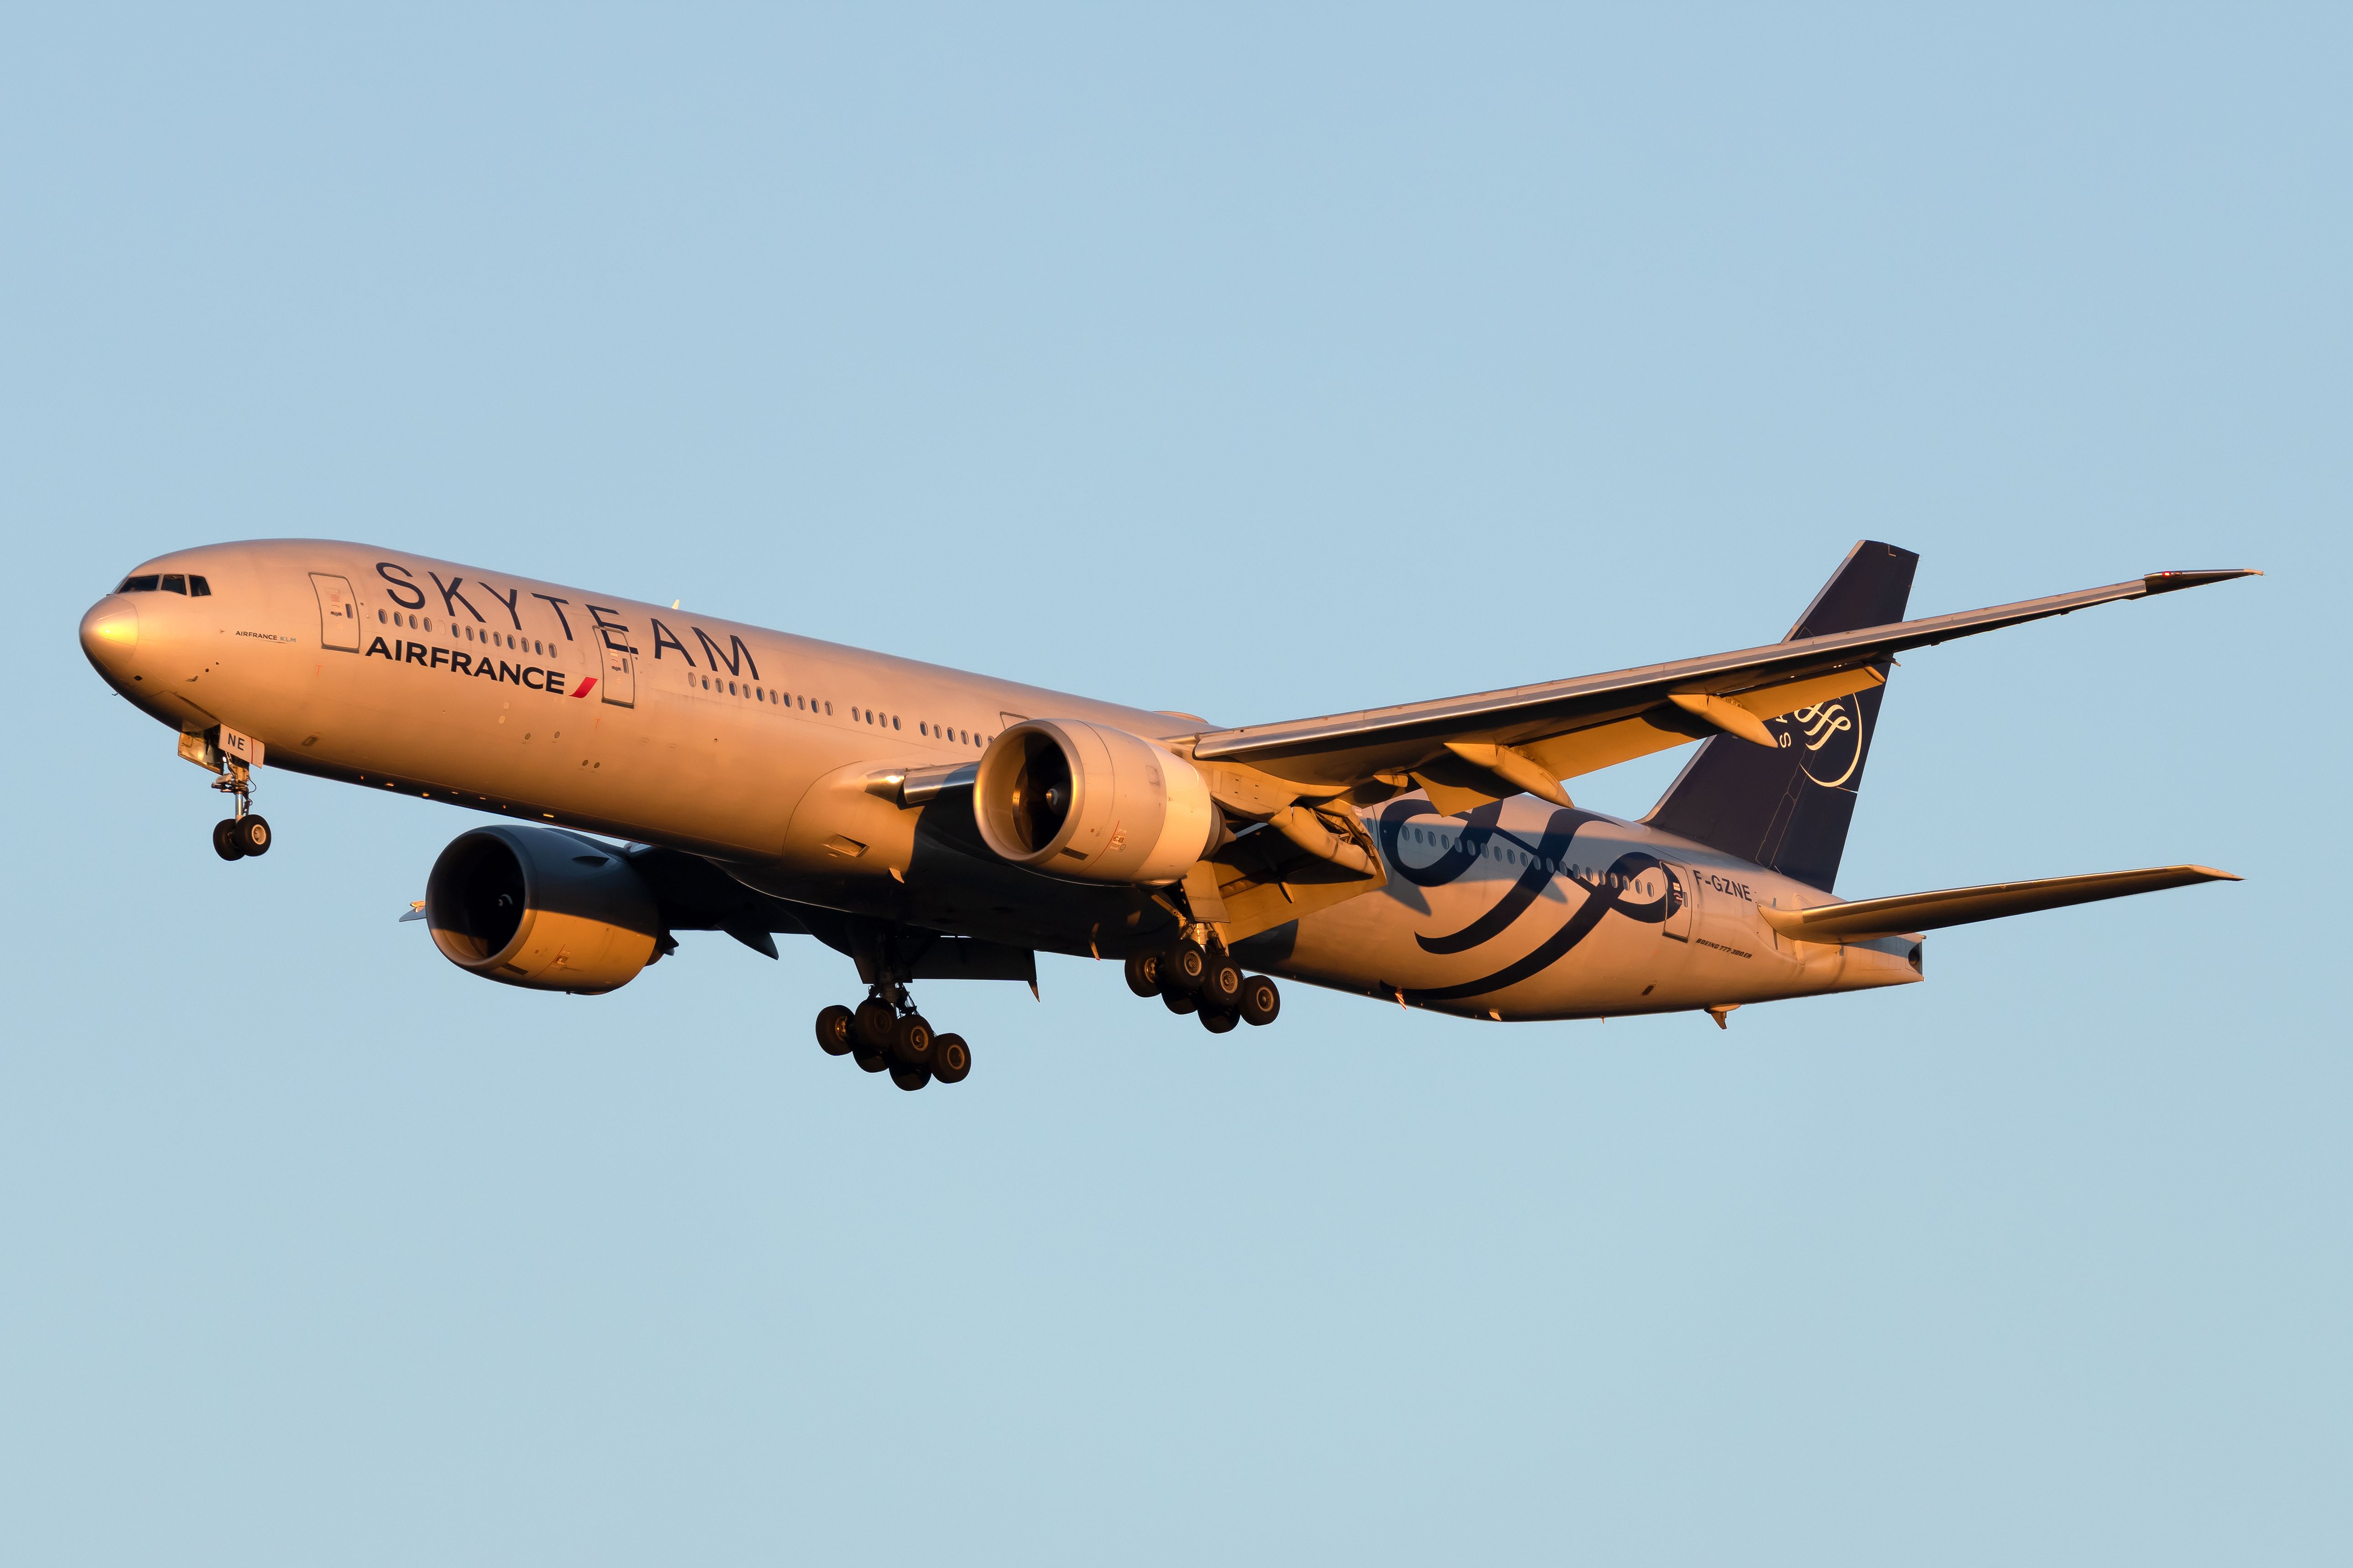 An Air France Boeing 777-300ER in SkyTeam Livery flying in the sky.